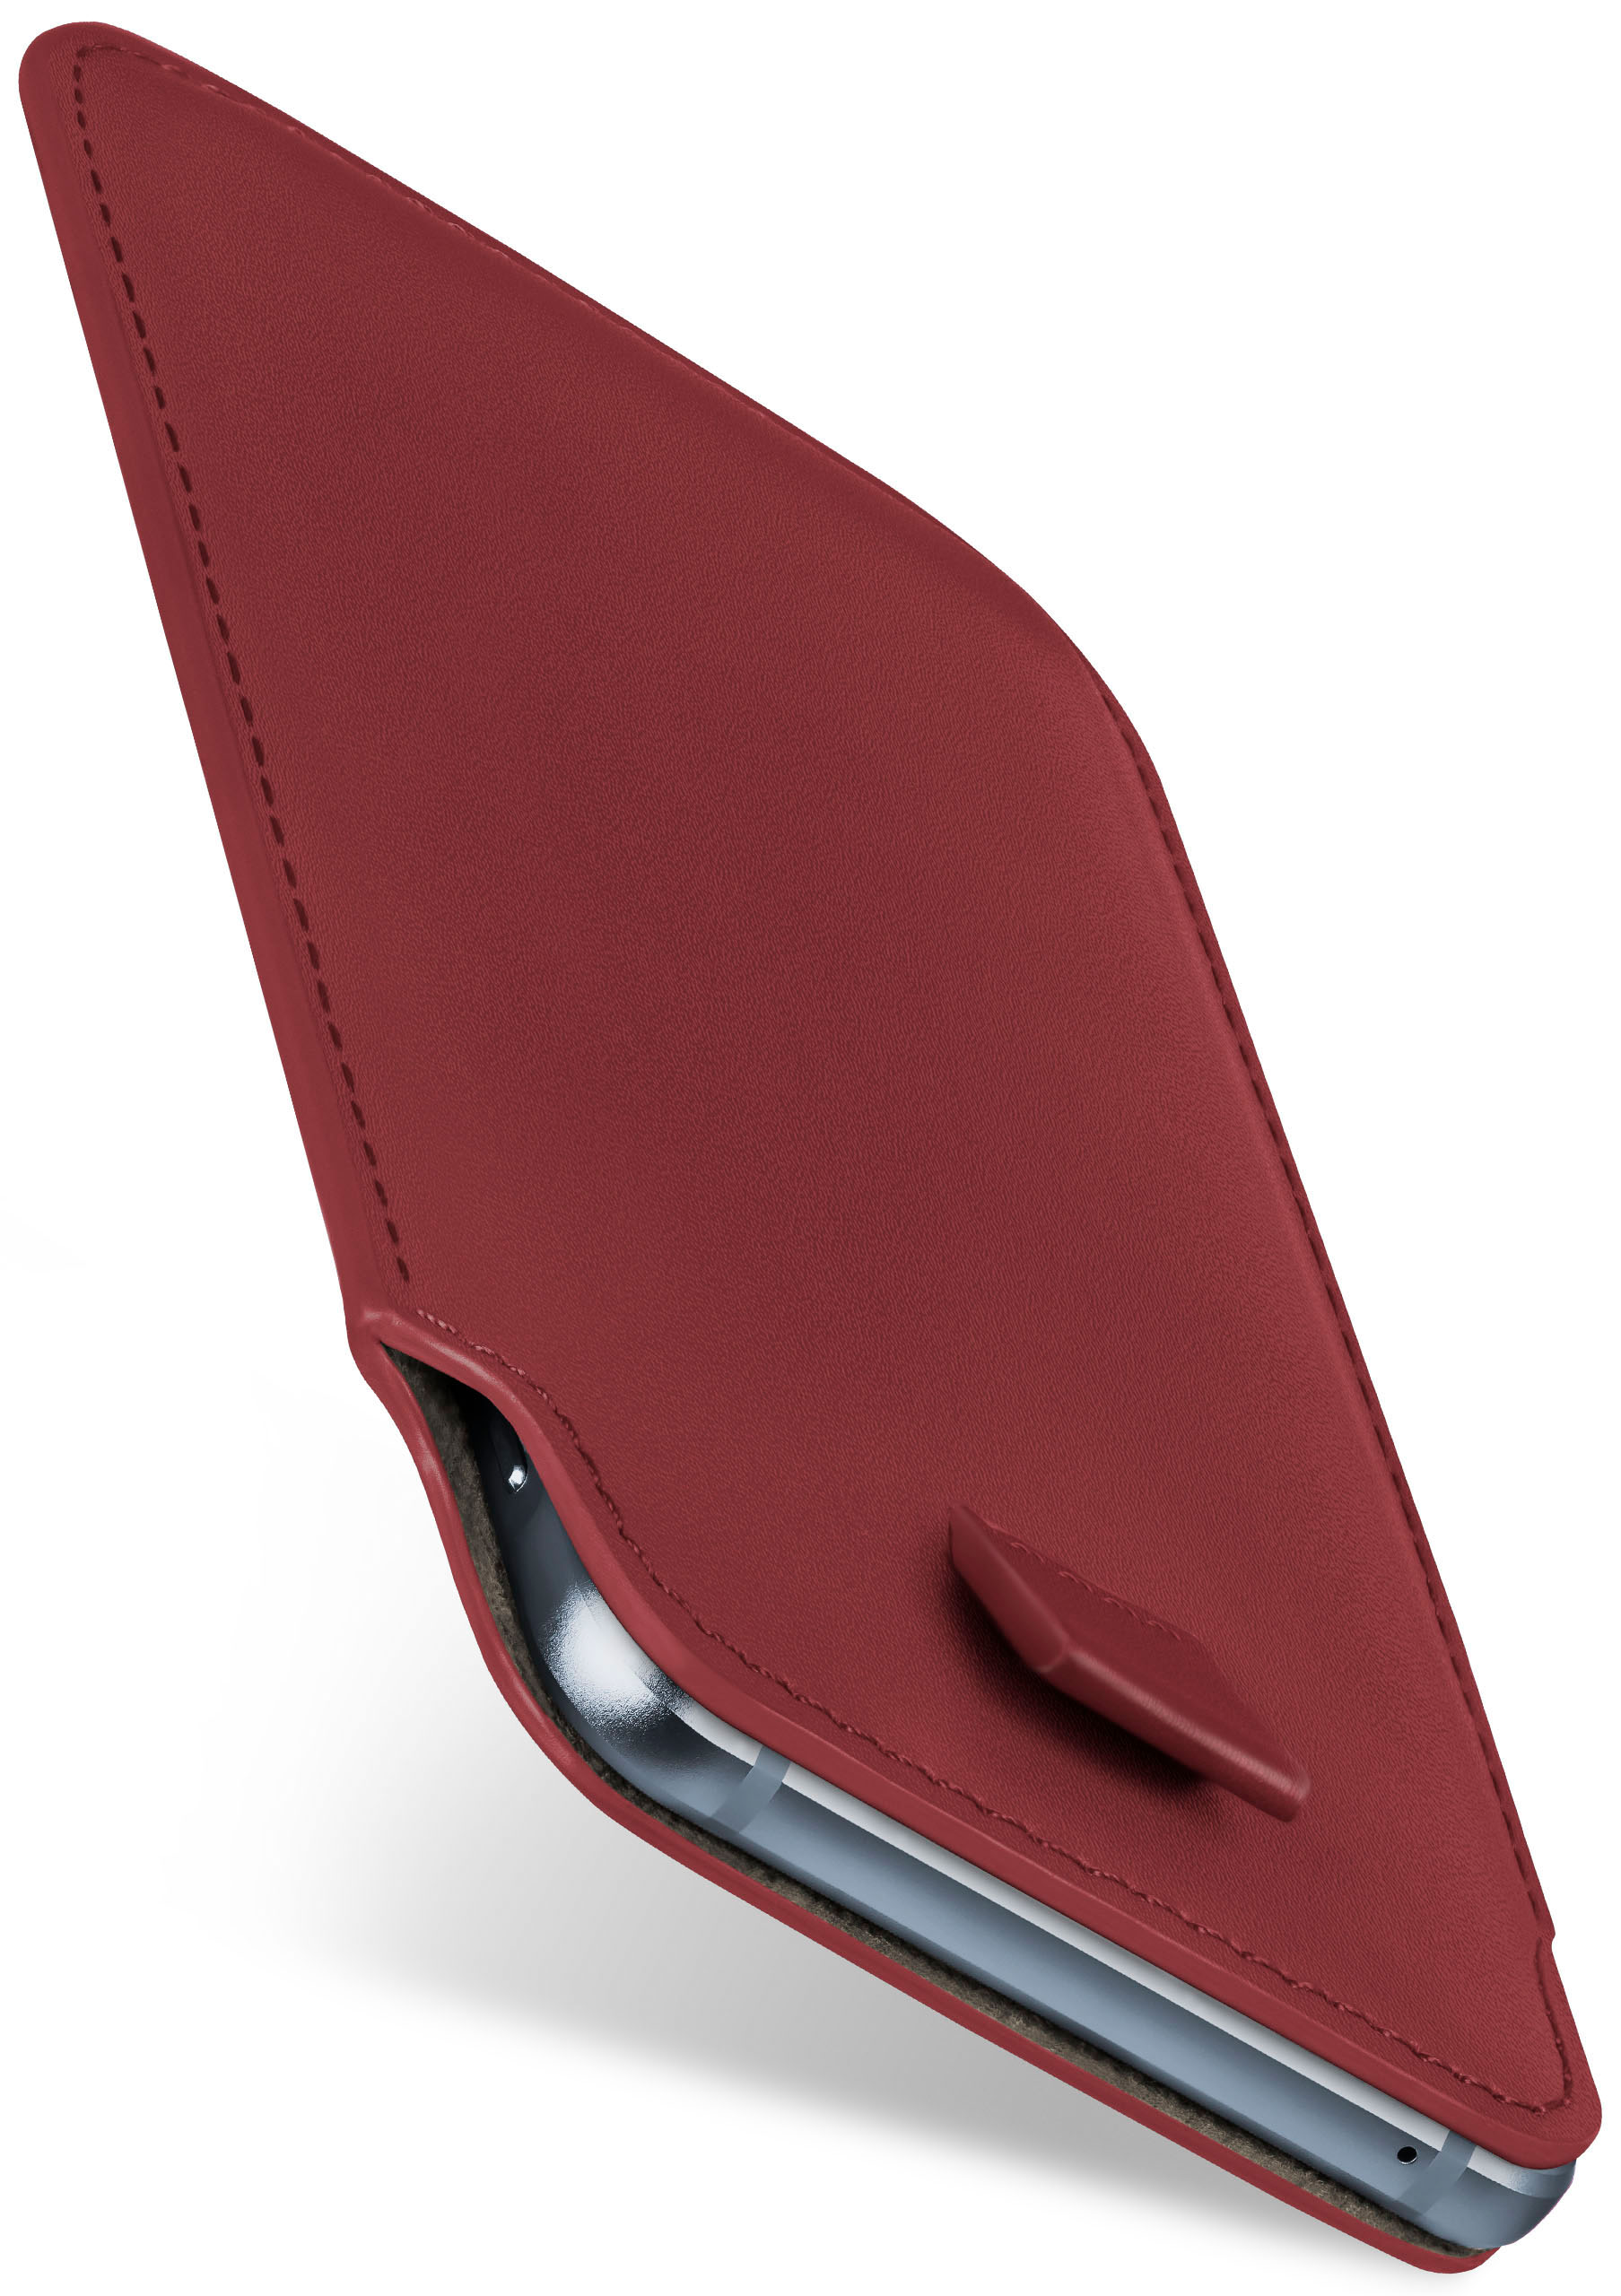 MOEX Slide Cover, Nokia, Case, Maroon-Red Full 113